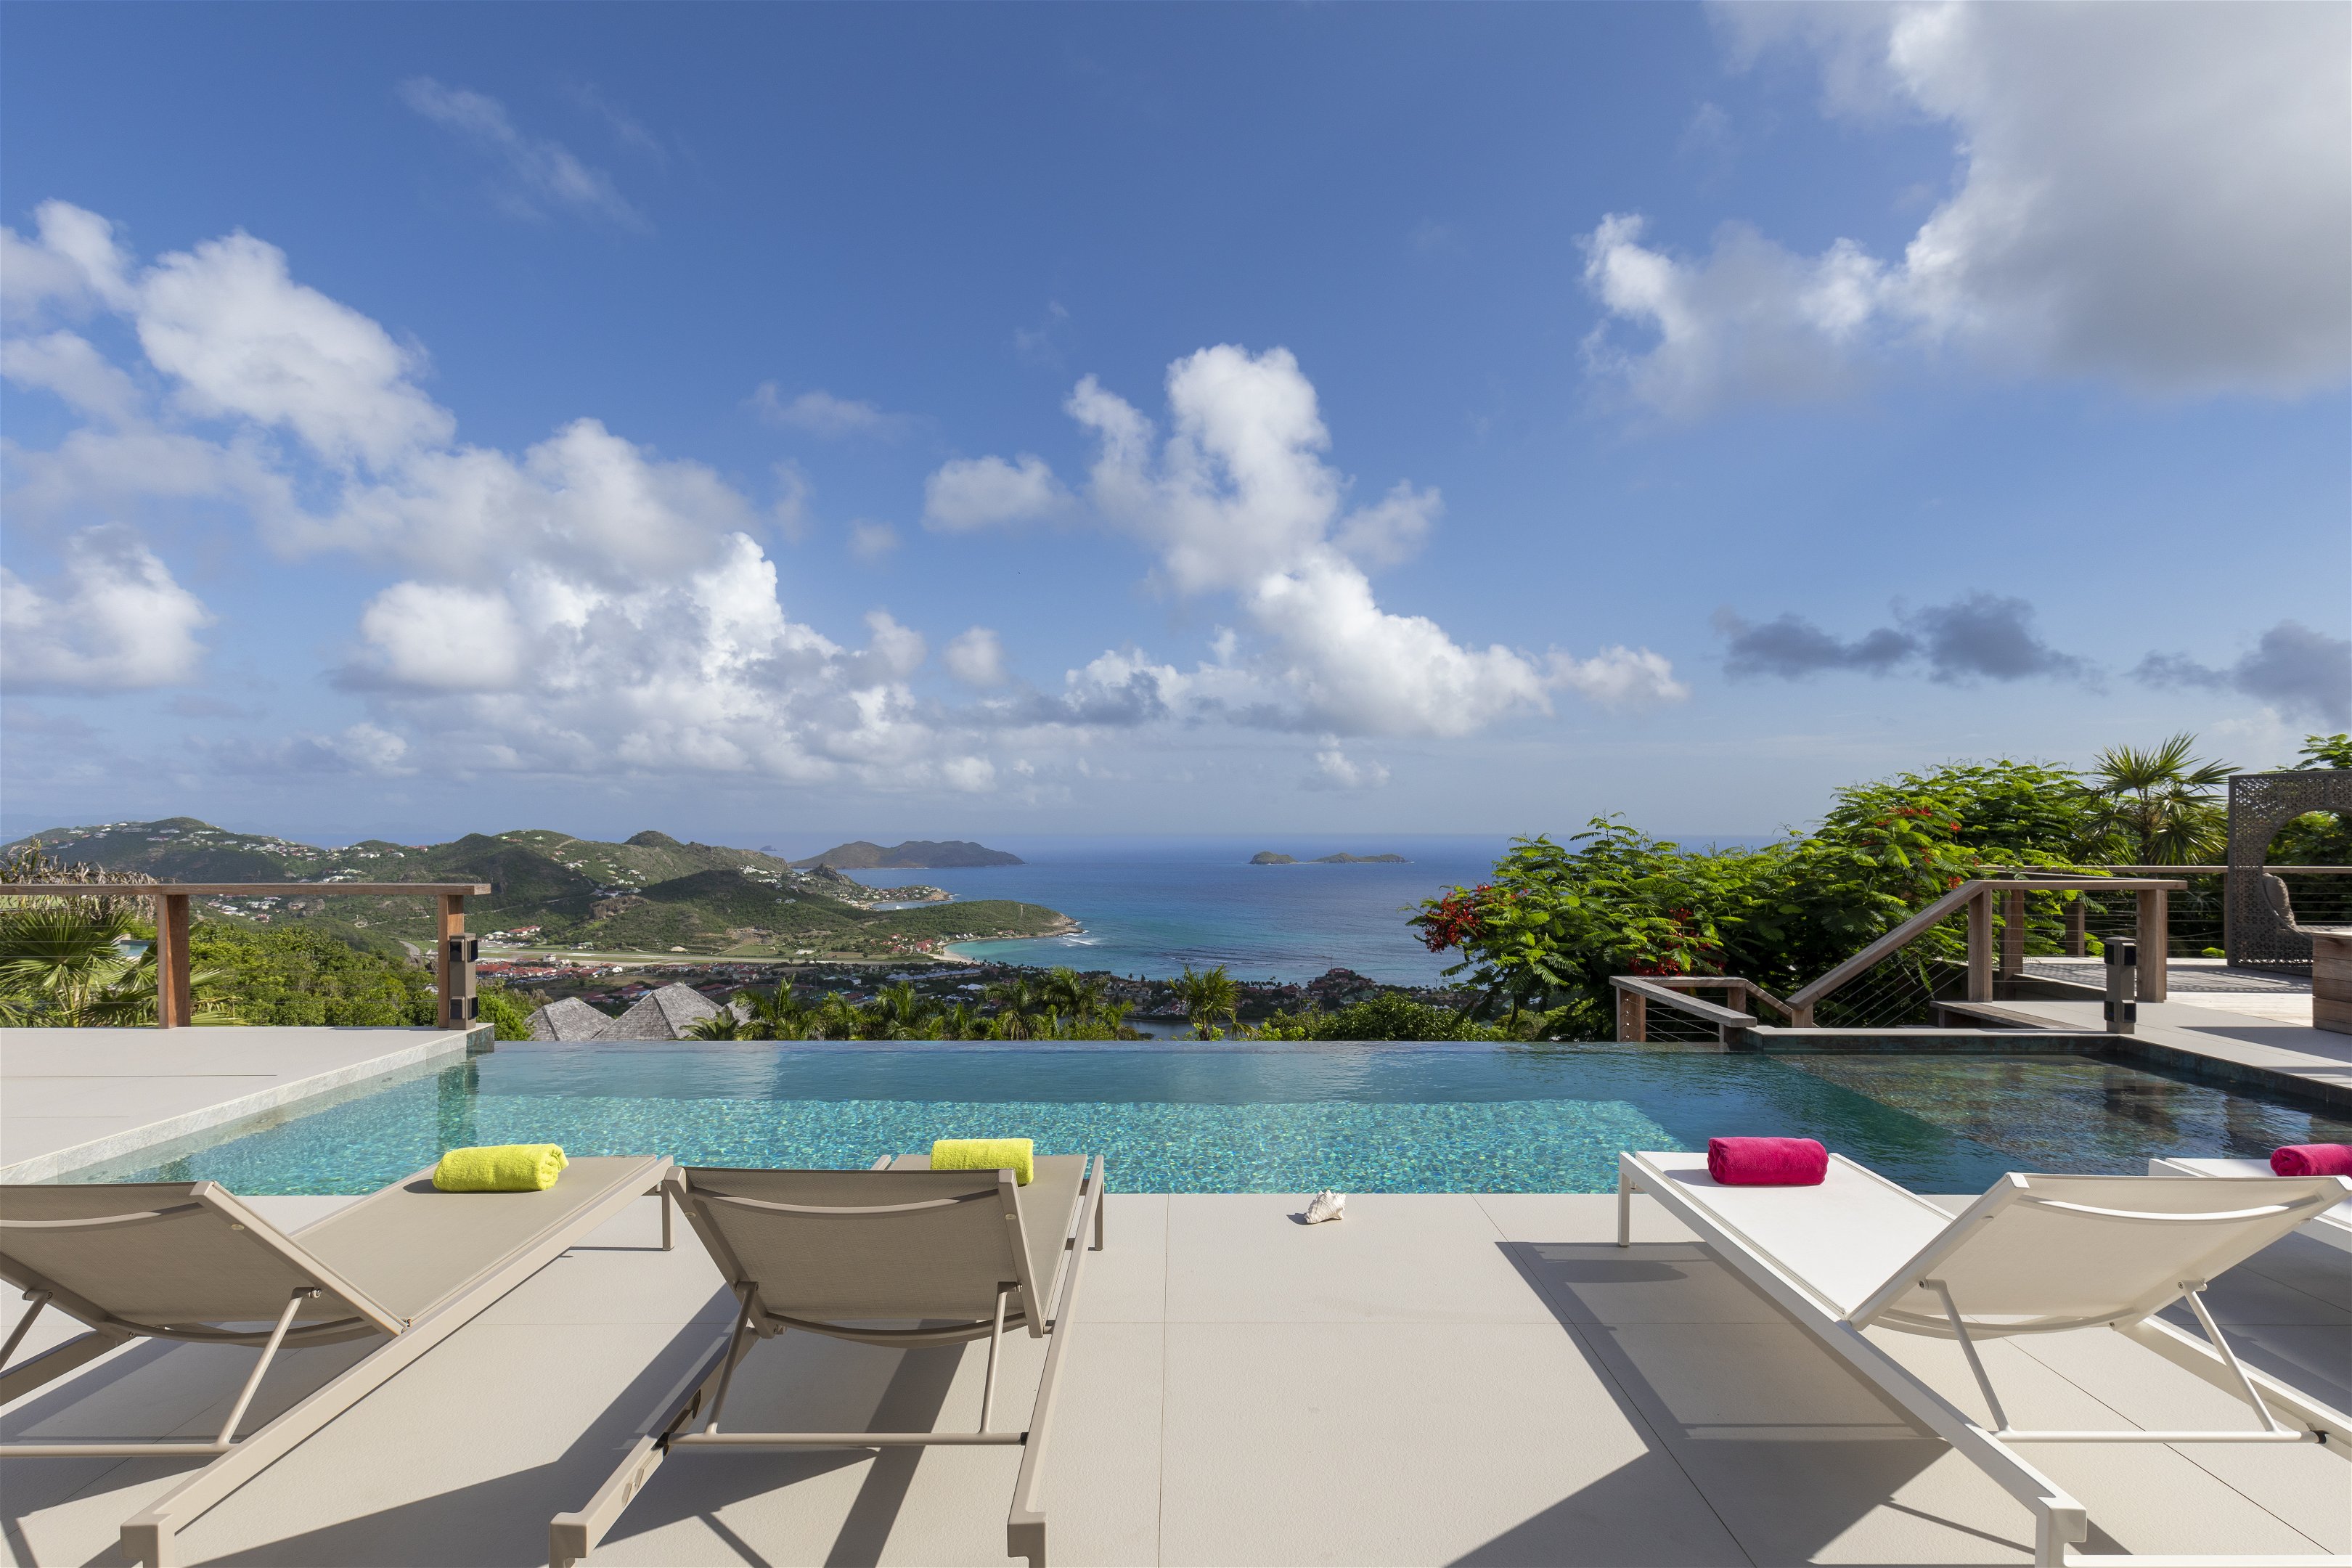 Heated pool, expansive terrace with sun loungers, deck chairs. Breathtaking views over the bay. 